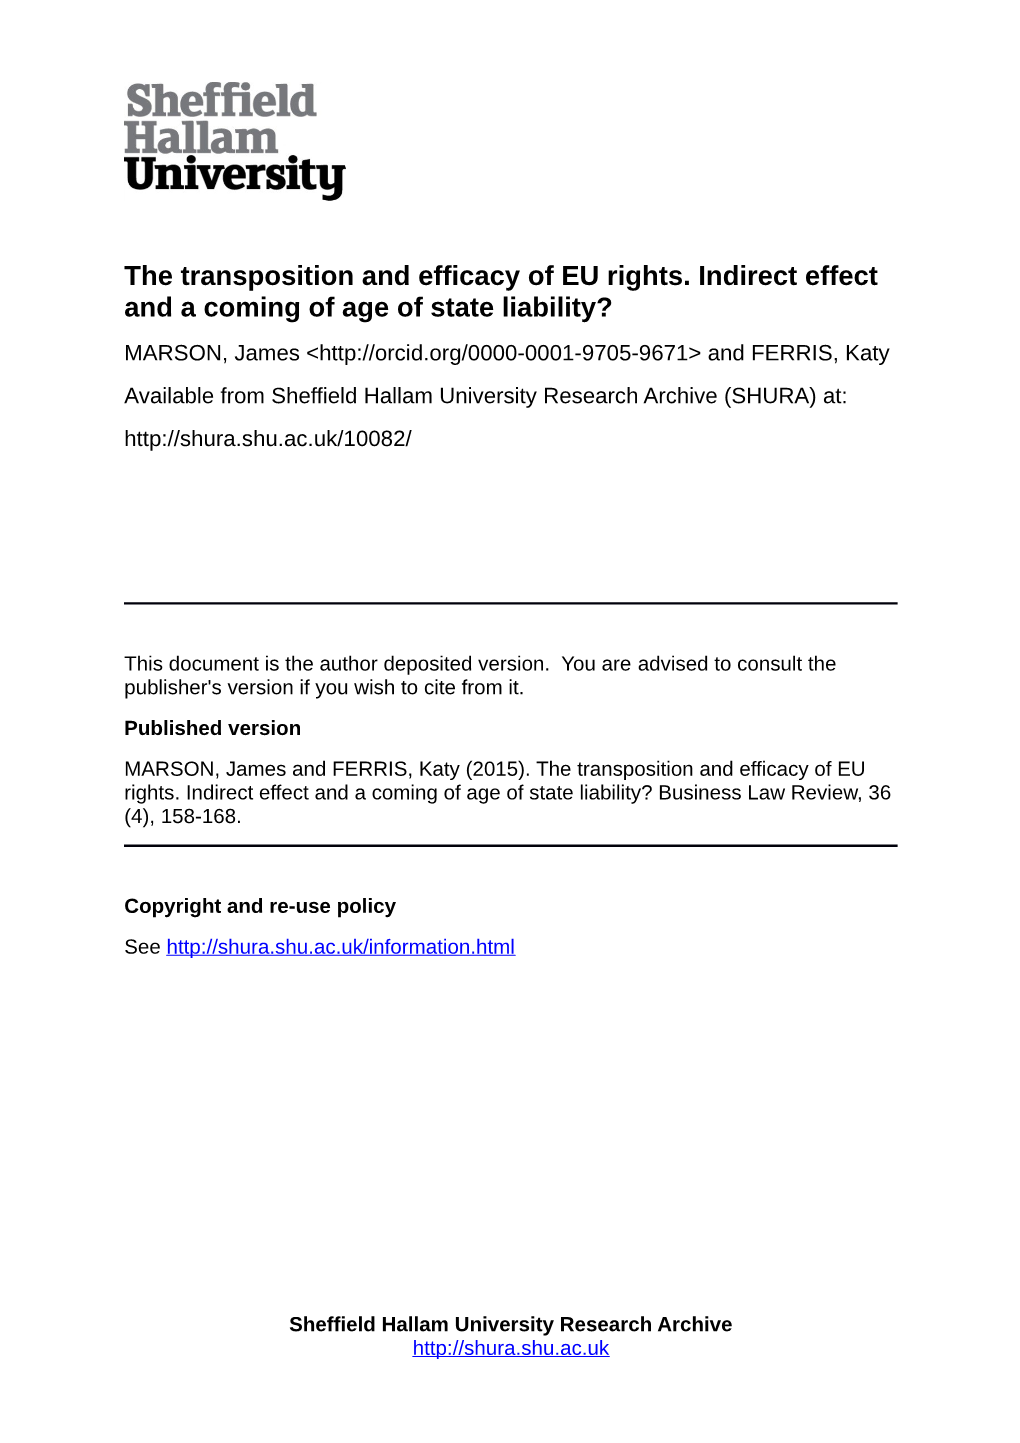 The Transposition and Efficacy of EU Rights. Indirect Effect and a Coming